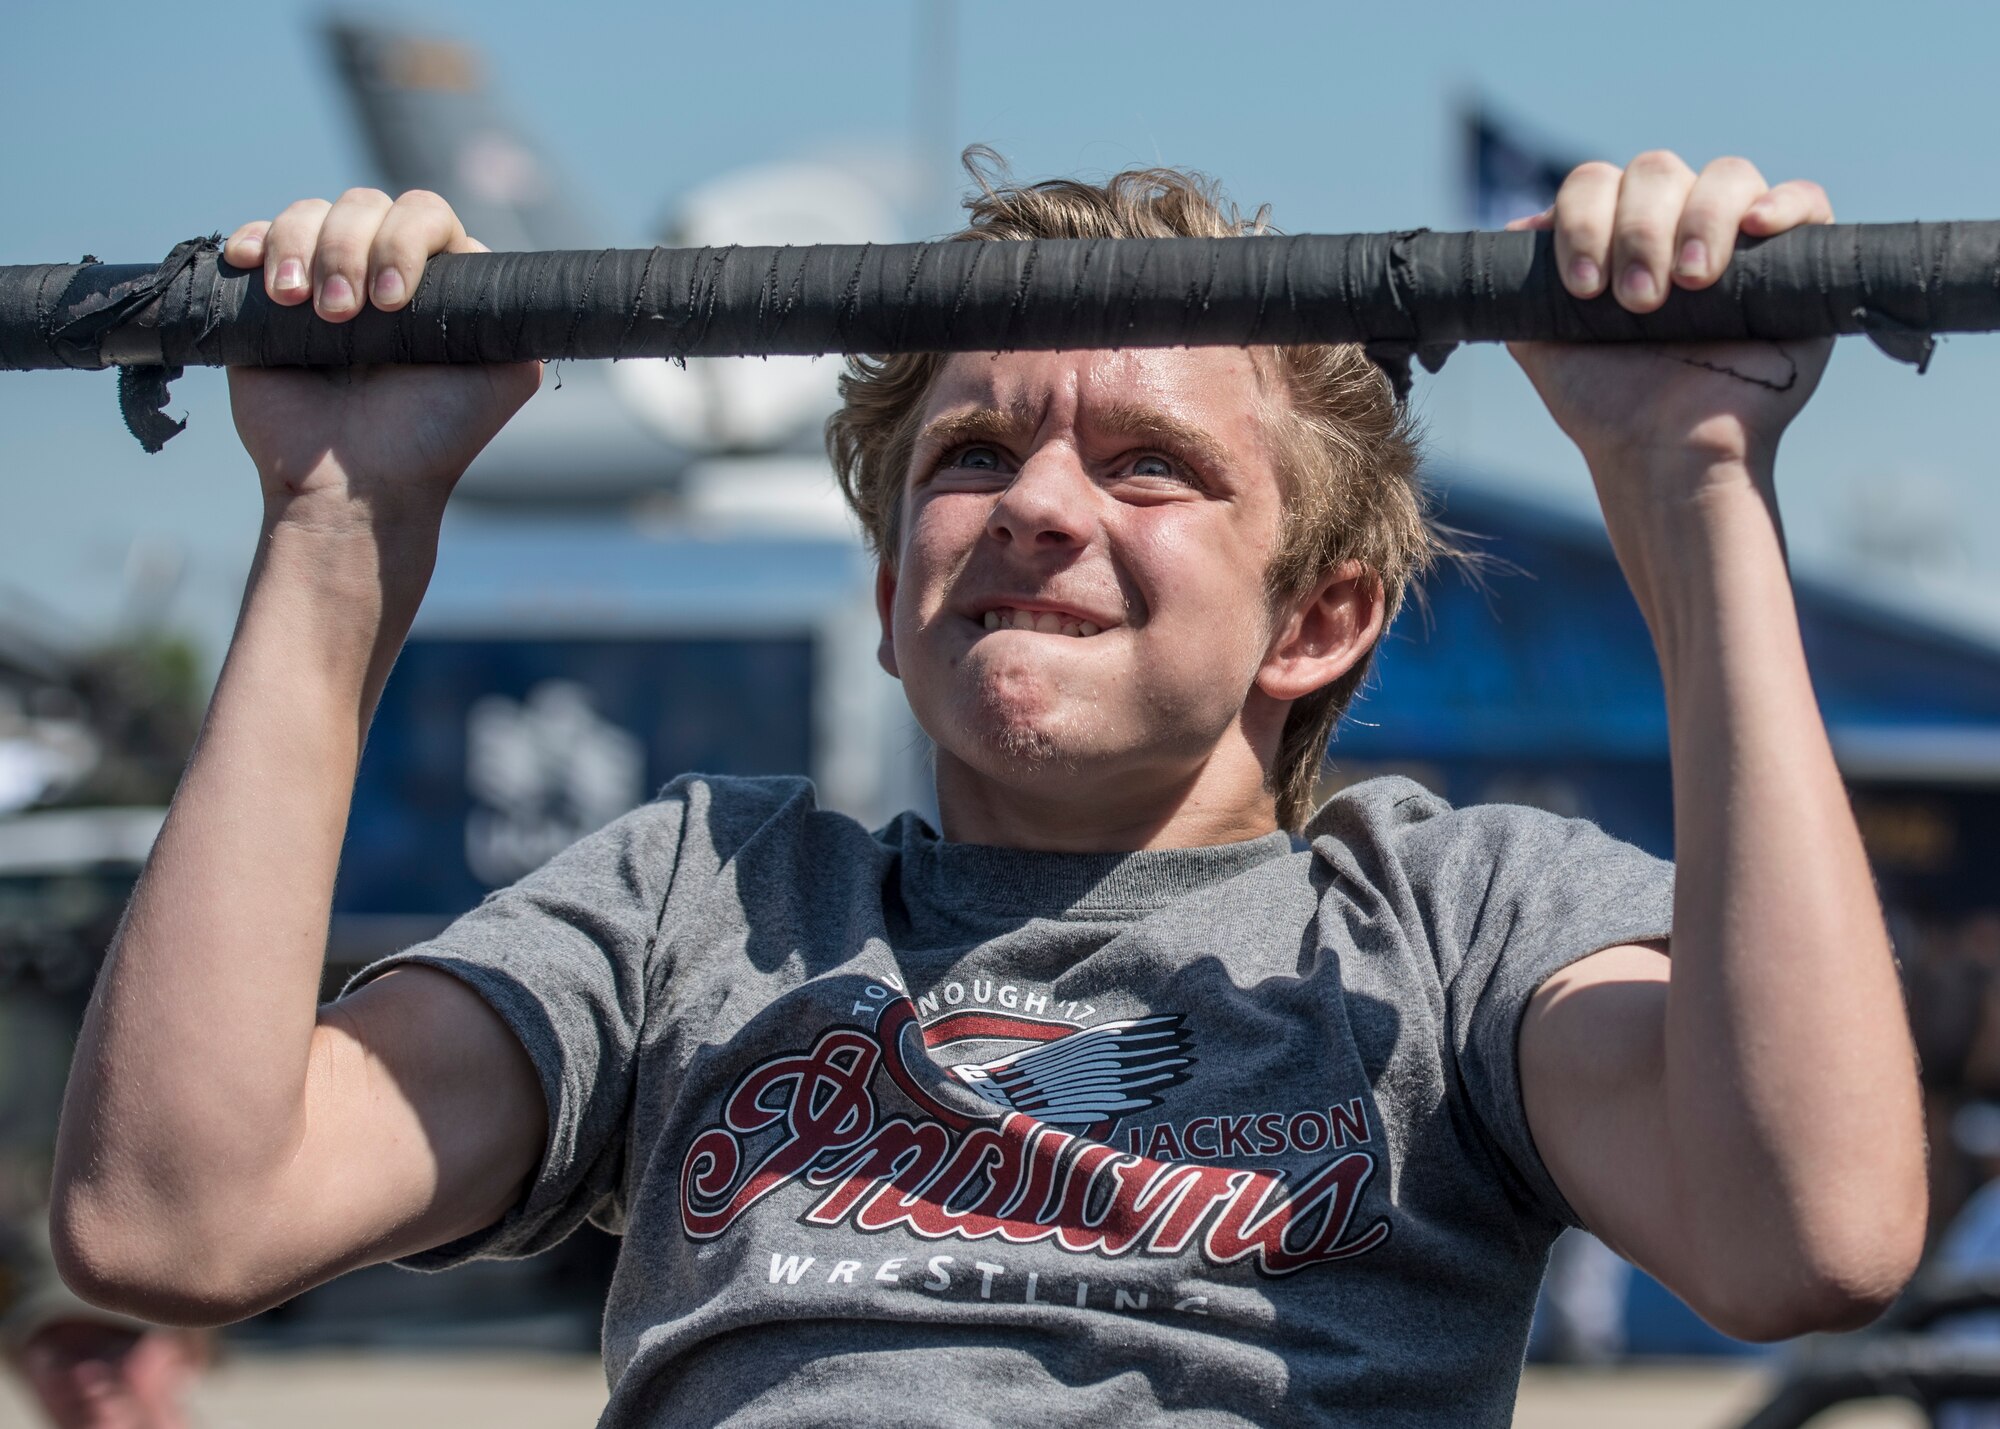 A boy attempts to complete 15 pullups at the recruiting station during the Scott Air Force Base Air Show, Scott Air Force Base, Ill., June 11, 2017. The base hosted the air show and open house to celebrate the 100th year of Scott AFB.  Over 50 aircraft, ranging from WWI’s Curtiss JN-4 Jenny to the currently utilized KC-135 Stratotanker, came to Scott, the fourth oldest Air Force base. Demonstrations included the Black Daggers, “Tora, Tora, Tora,” and the USAF Thunderbirds. Opened in 1917 and previously named Scott Field, the base has seen its mission evolve and expand to encompass a multitude of priorities, including aeromedical evacuation and communications.  Today, Scott is home to 31 mission partners and provides around-the-clock logistics support and rapid global mobility, carried out primarily by U.S. Transportation Command and Air Mobility Command.